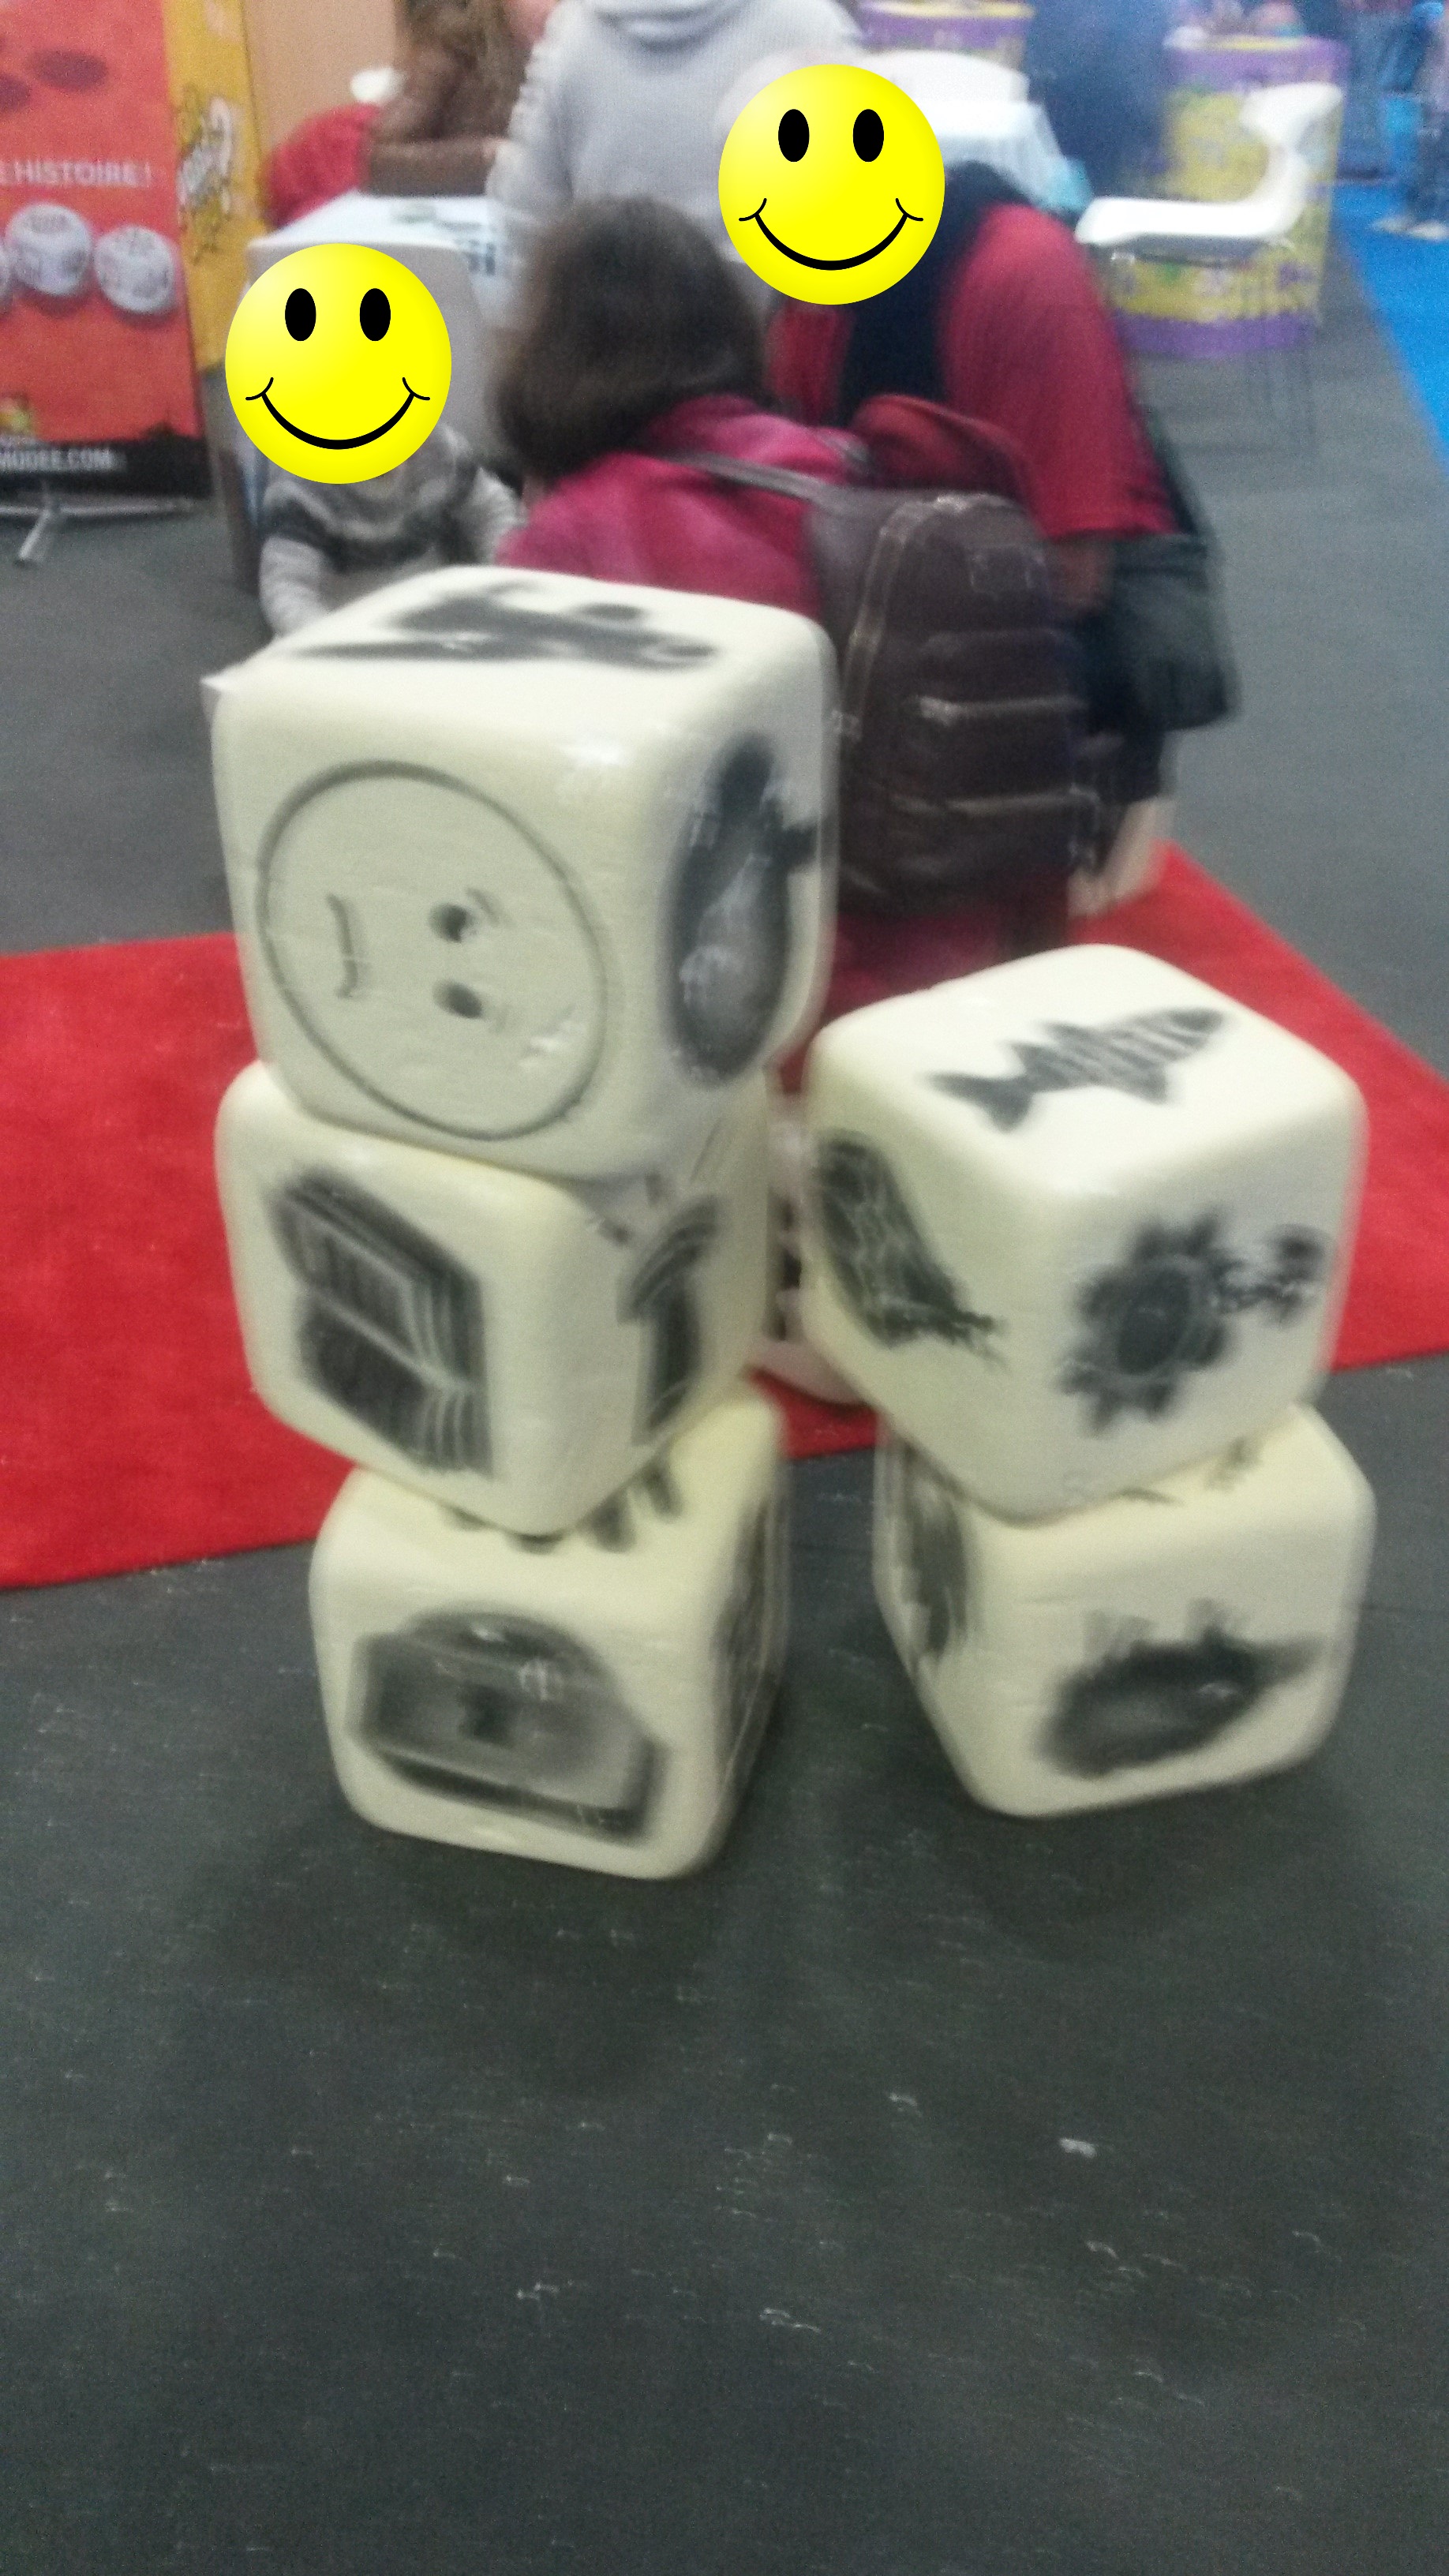 A giant format of Story Dice